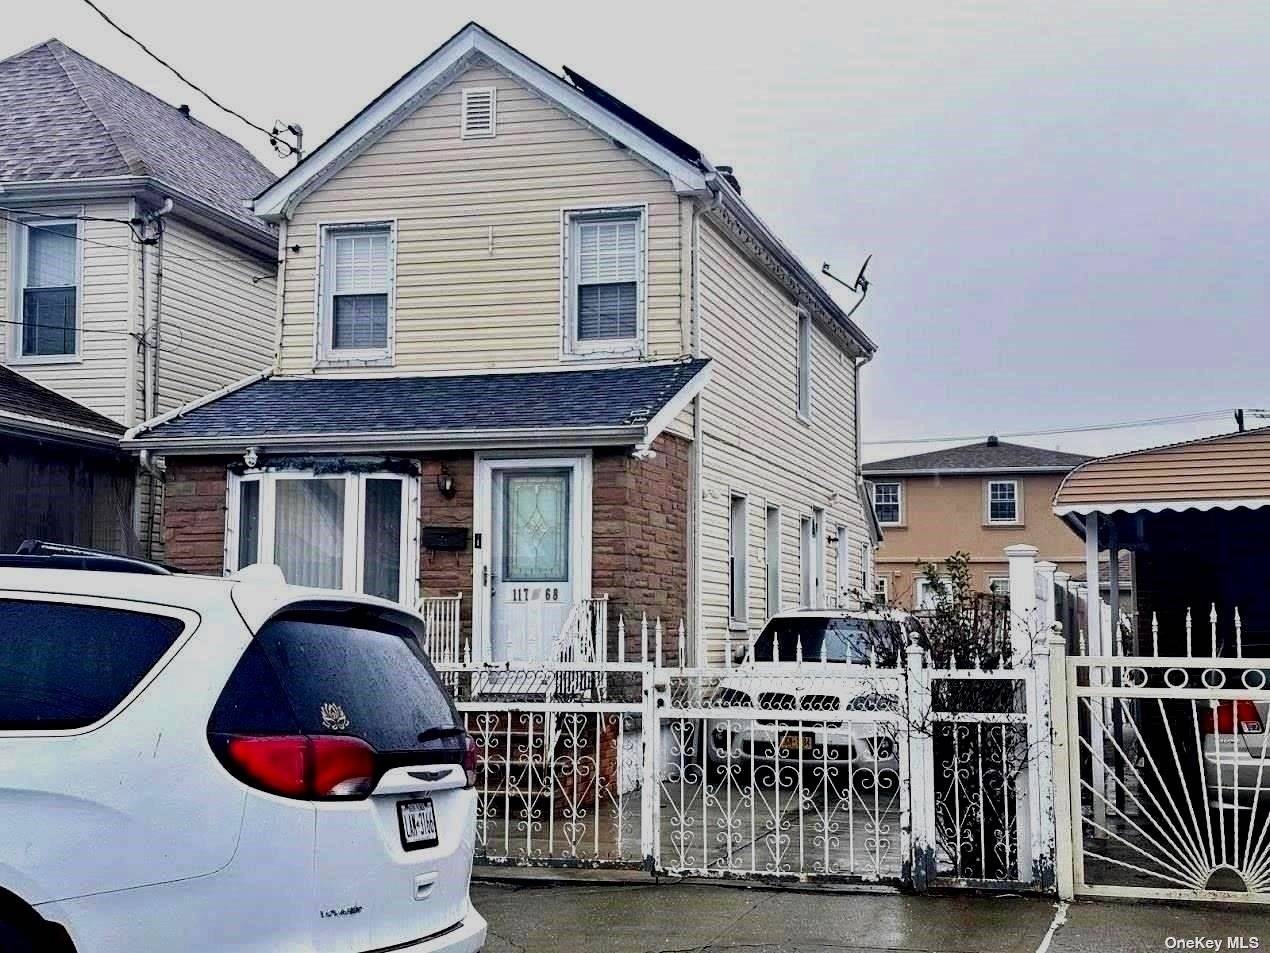 TWO FAMILY IN MINT CONDITION 2 1 BEDROOMS FULL FINISHED BASEMENT, WIDE PVT DRIVEWAY, HUGE BACK YARD, MINI SPLIT AC, NEW CUSTOM KITCHEN AND BATHS, CLOSE TO ALL PUBLIC TRANS ...